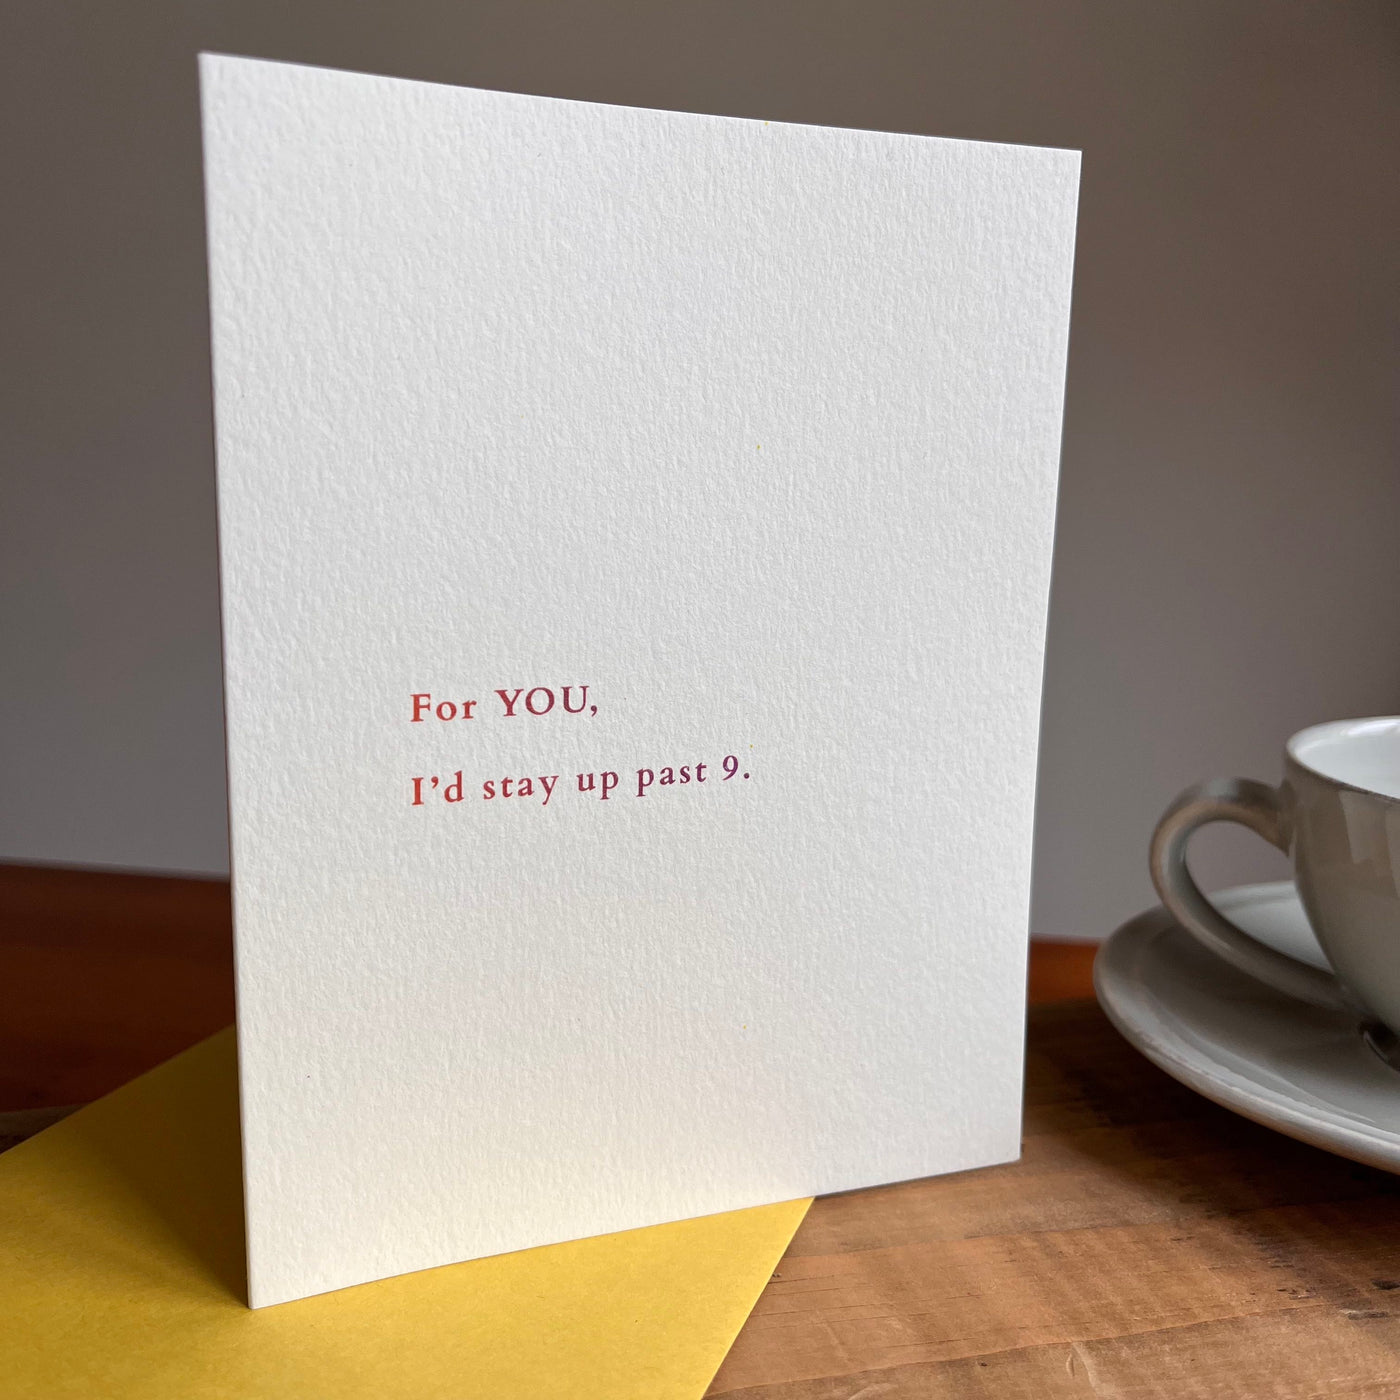 Beknown greeting card next to coffee cup. For you, I'd stay up past 9.